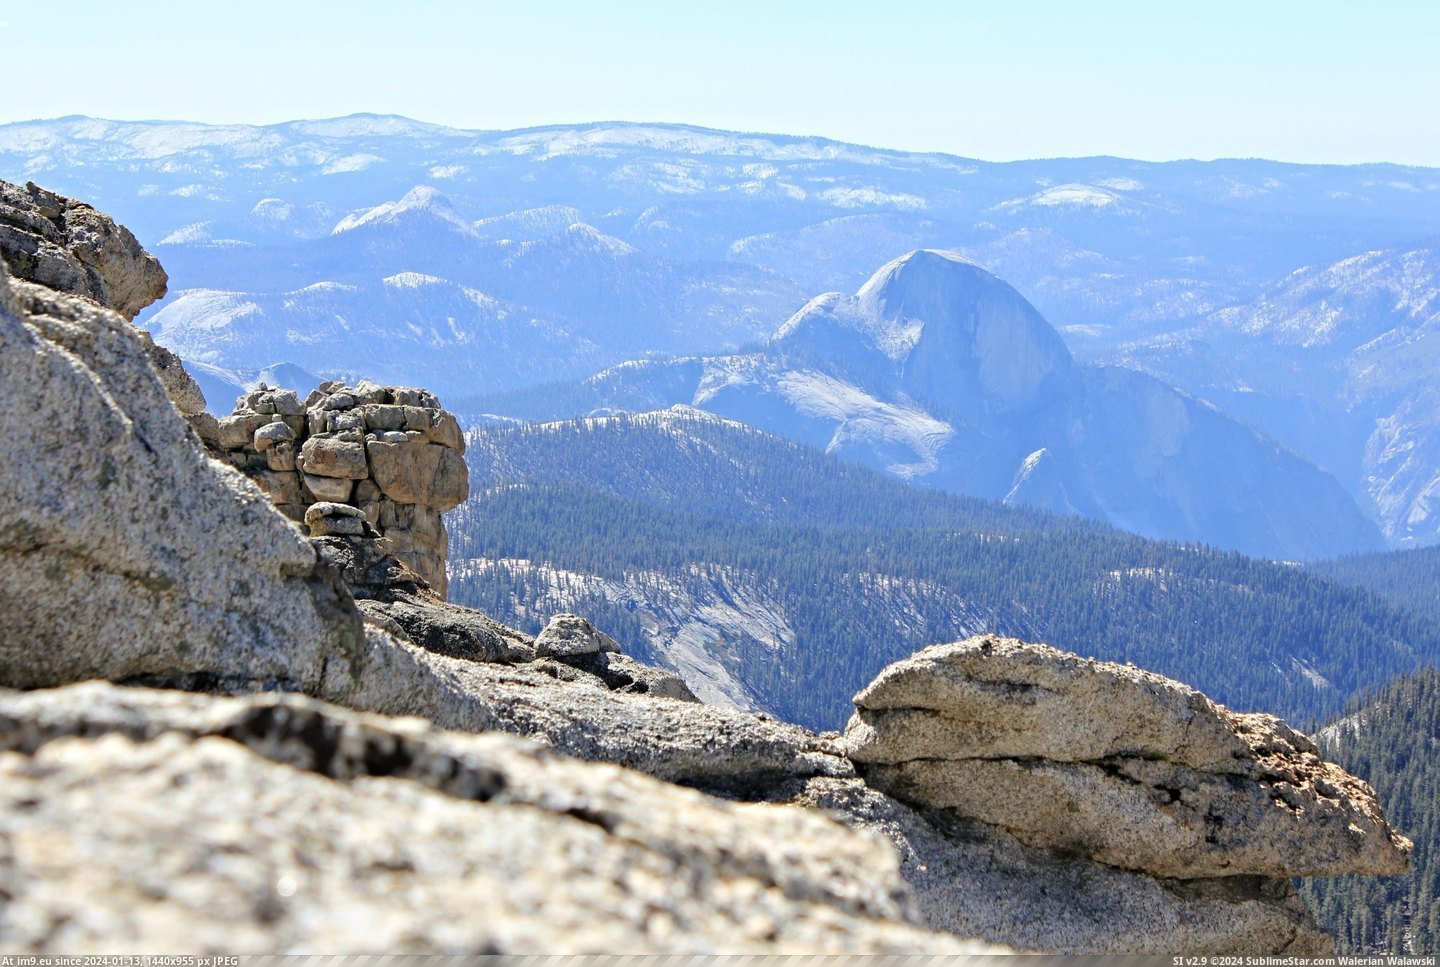 #Feet #Yosemite #Dome #Degree #Providing #Mount #Panoramic [Earthporn] 2,000 feet above Half Dome is towering Mount Hoffman, providing a 360 degree panoramic view of Yosemite and the Sier Pic. (Изображение из альбом My r/EARTHPORN favs))